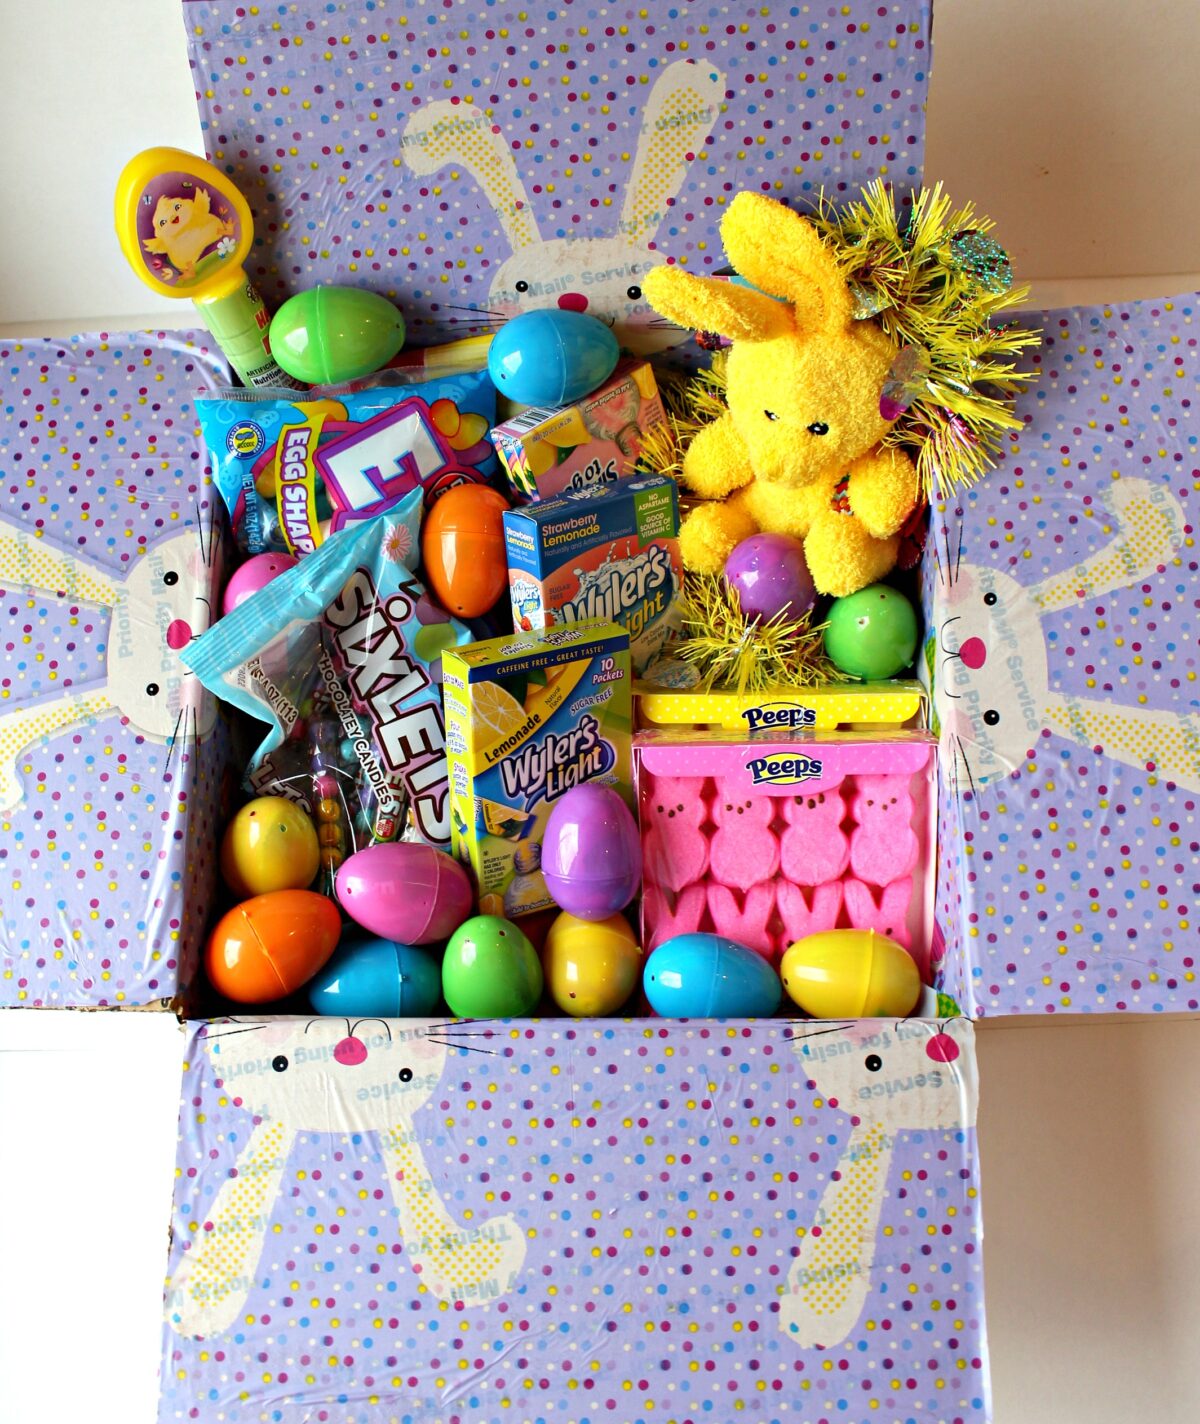  Eater care package with decorated box flaps filled with Easter candy and toys.